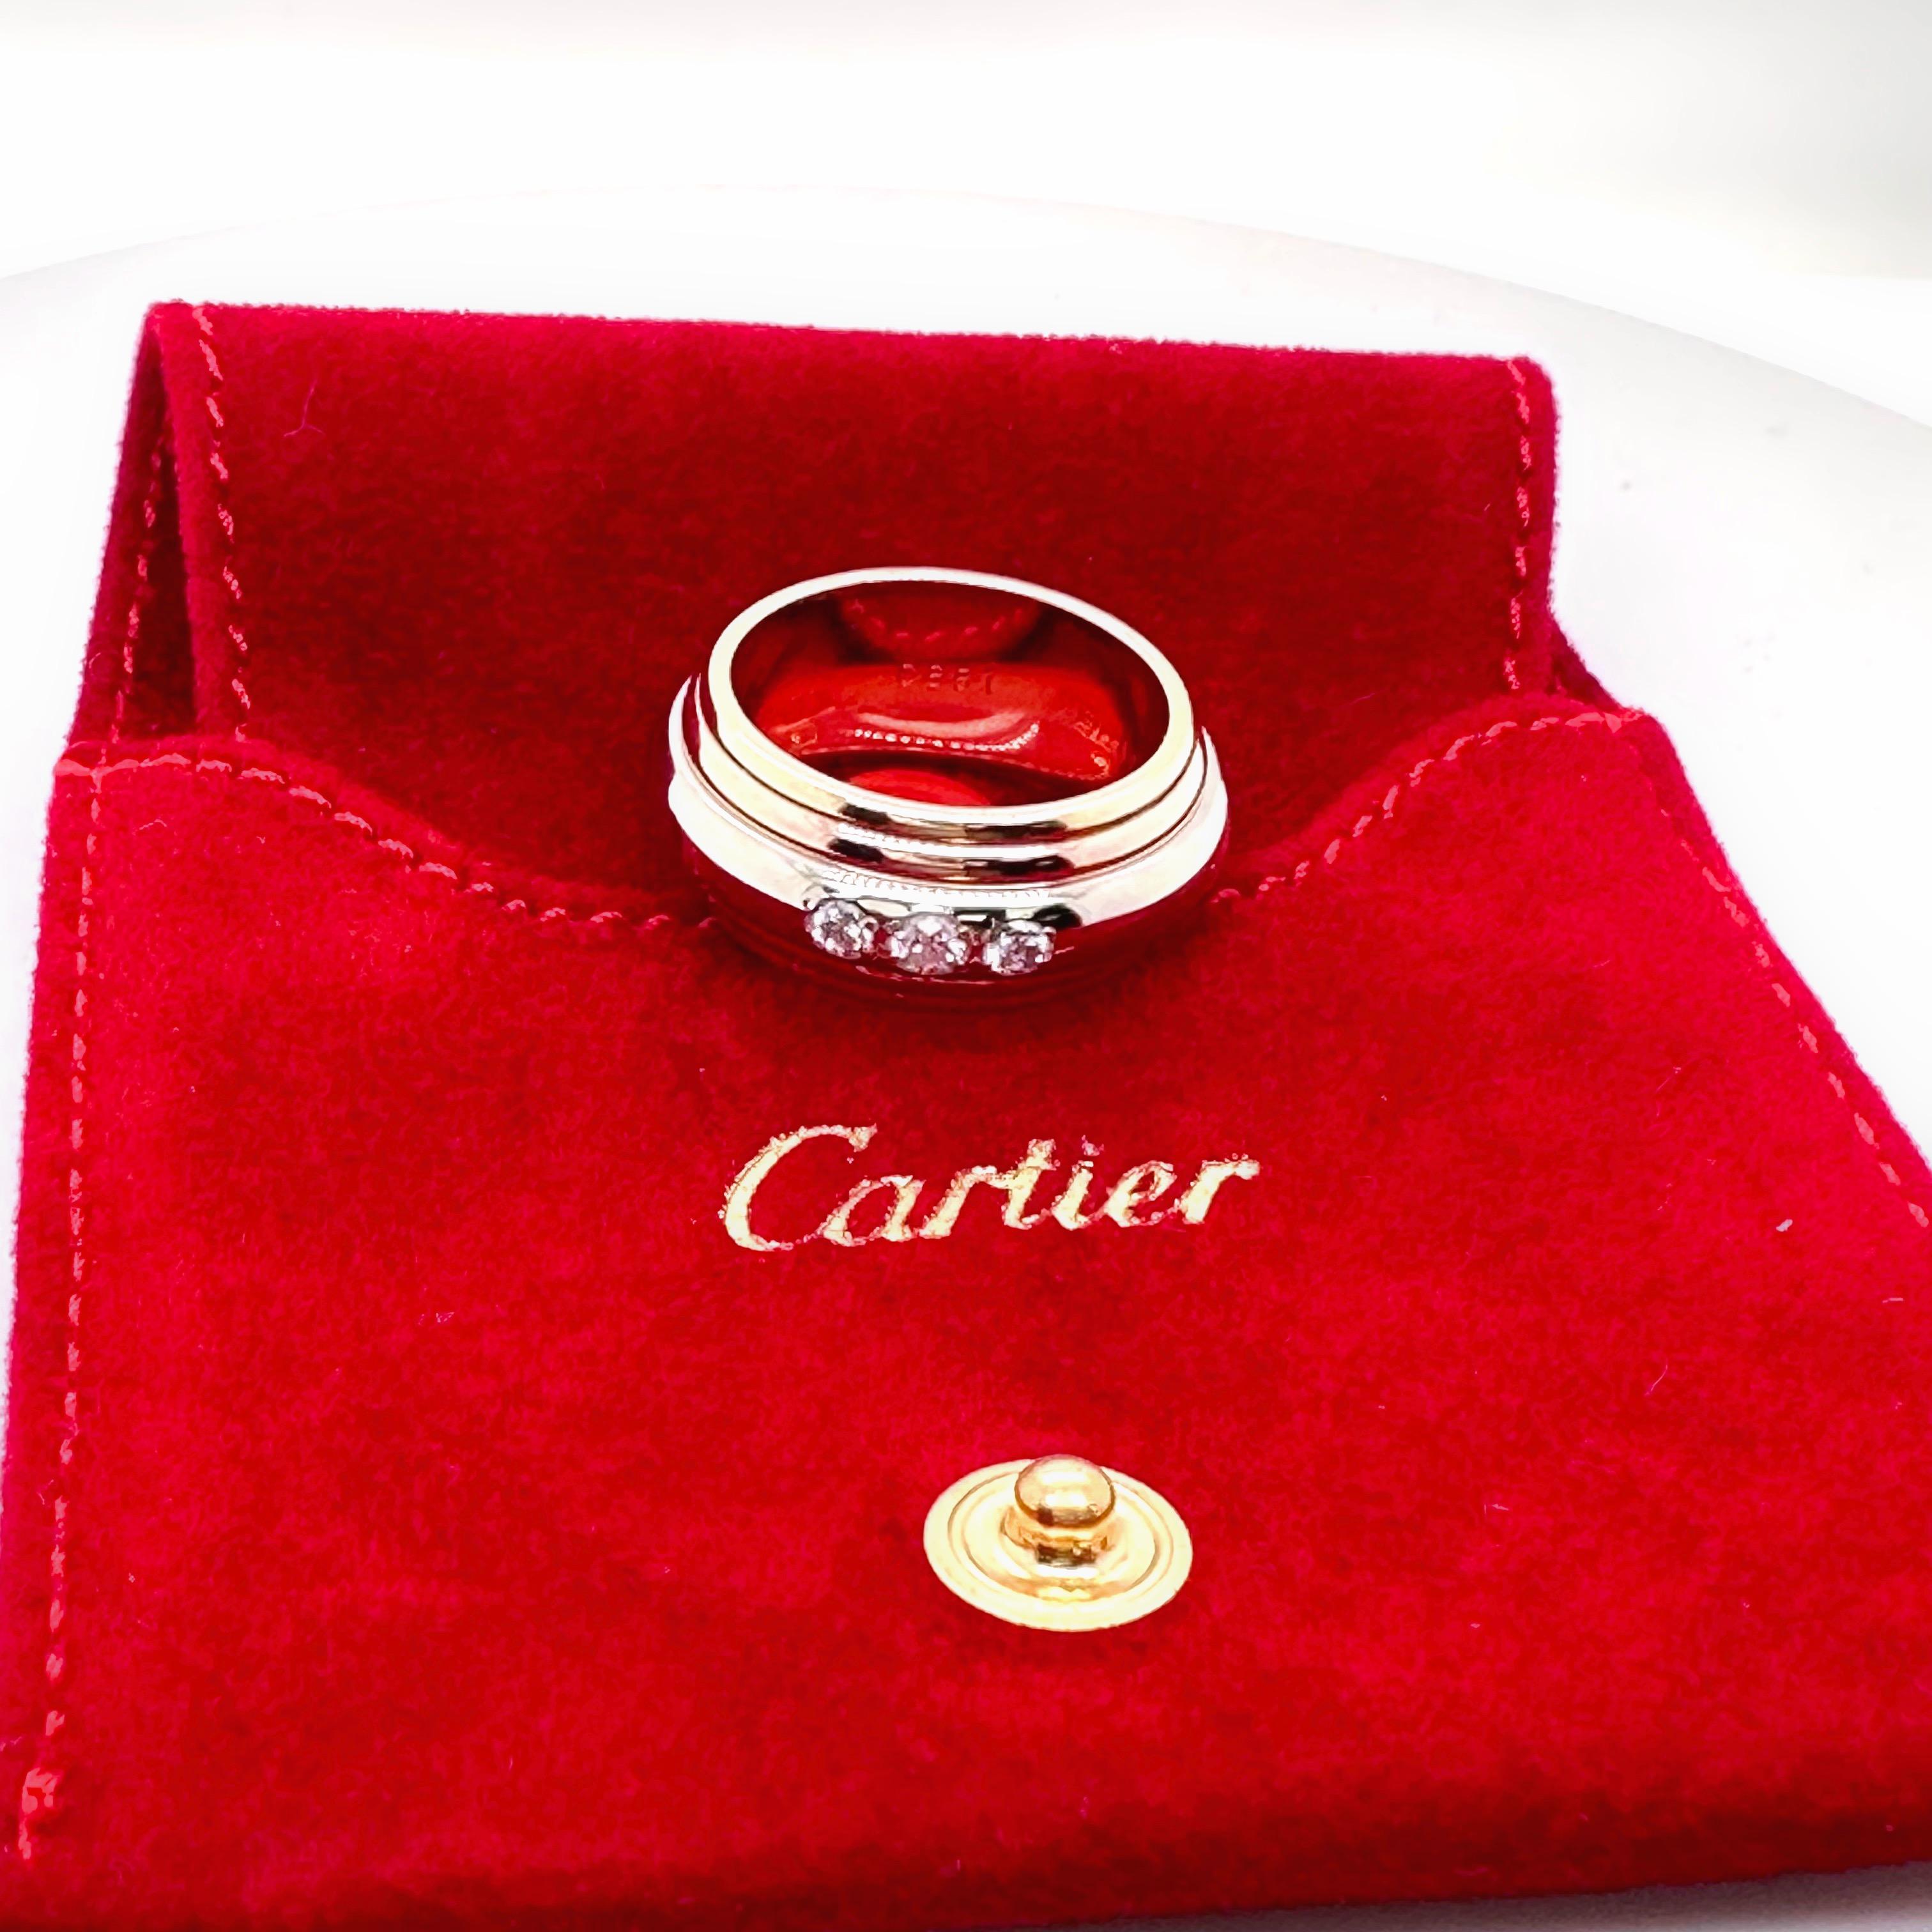 Cartier Saturne Collection Multi-Tone Gold Diamond Band Ring
Style:  Band
Ref. number:   B46468
Metal:   Multi-Toned 18kt White Yellow Rose Gold
Size:  6.5 / 52, 10 mm Width
Hallmark:   Cartier 750 986619 52 © CARTIER 1990
Includes:   Cartier Ring